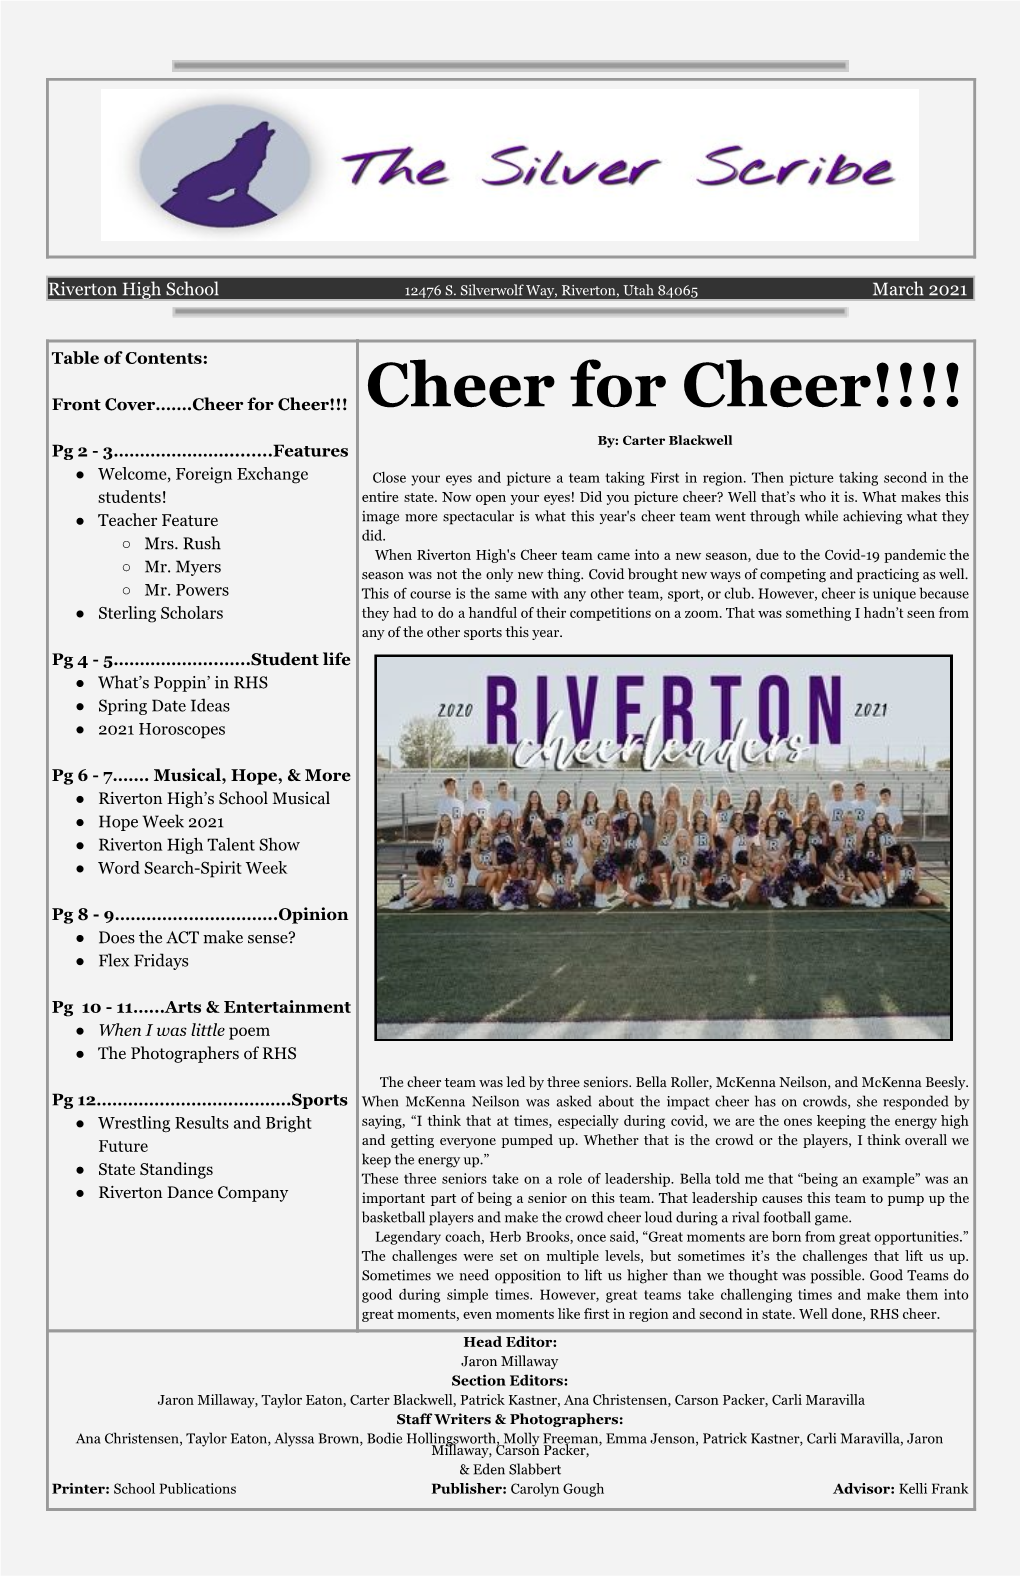 Cheer for Cheer!!!!